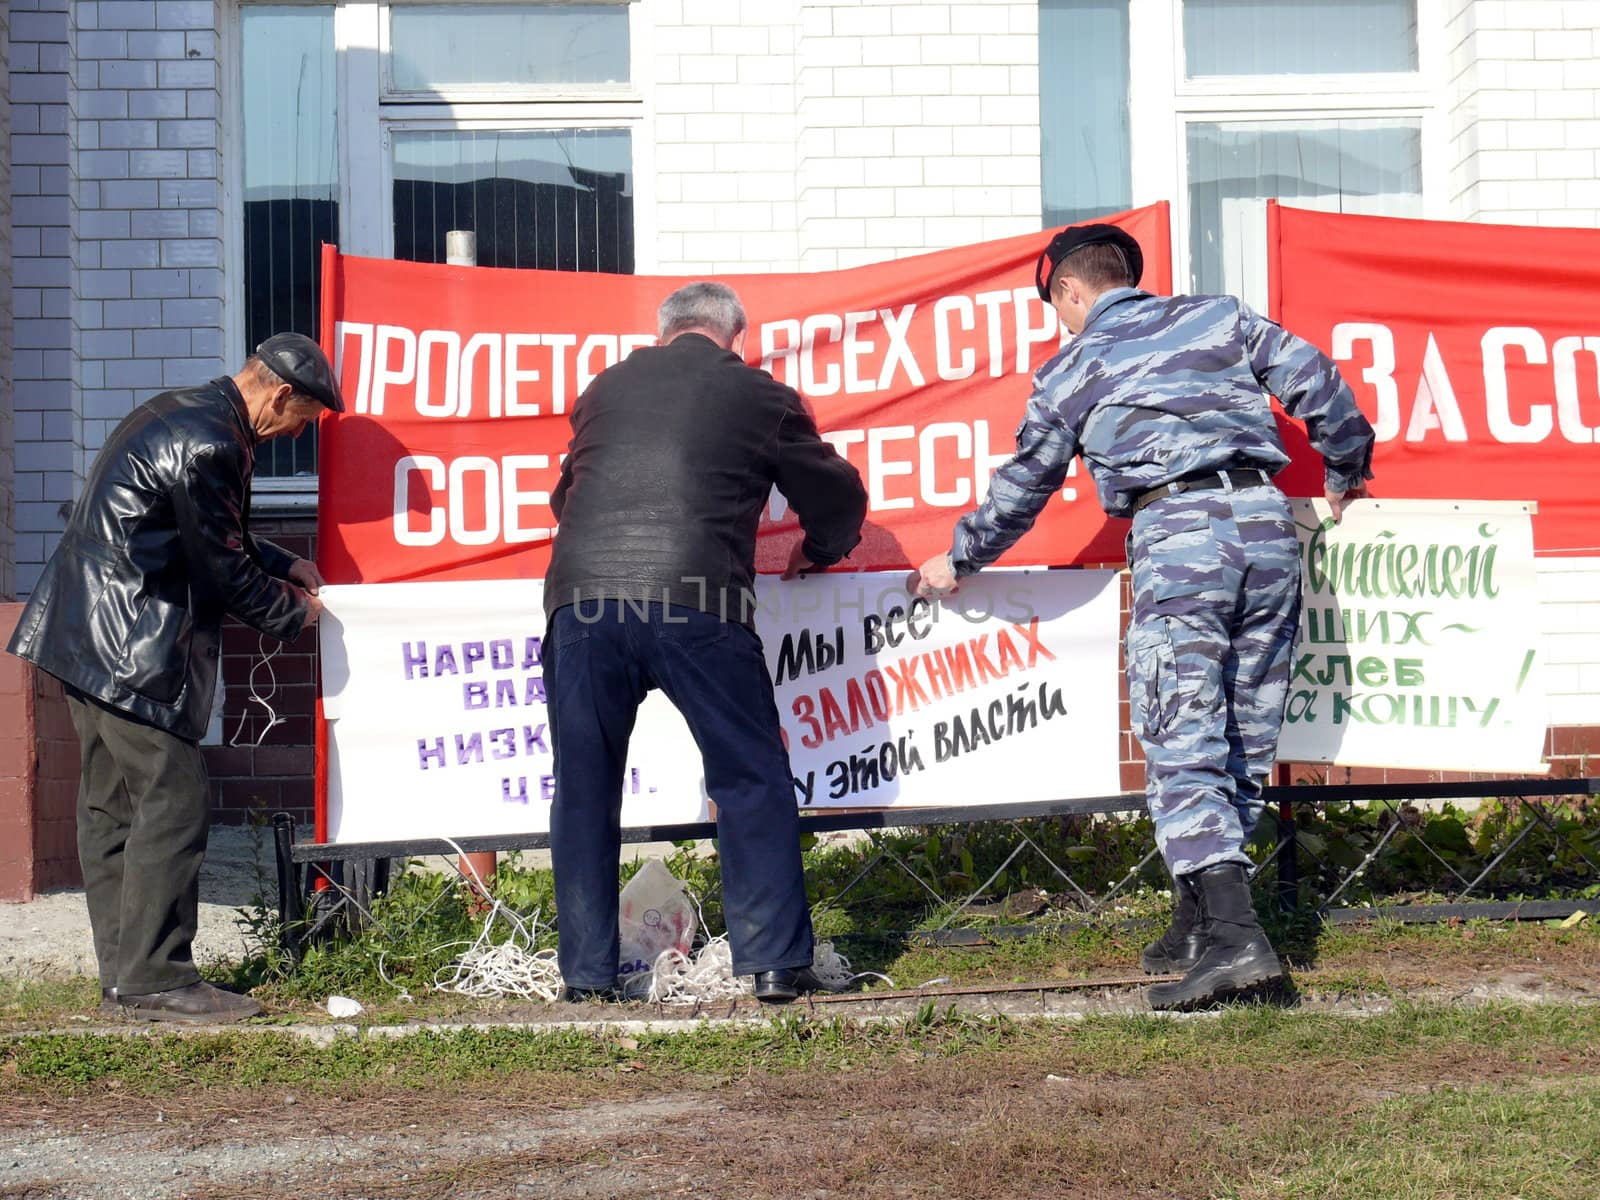 Peoples install communism banners by Stoyanov